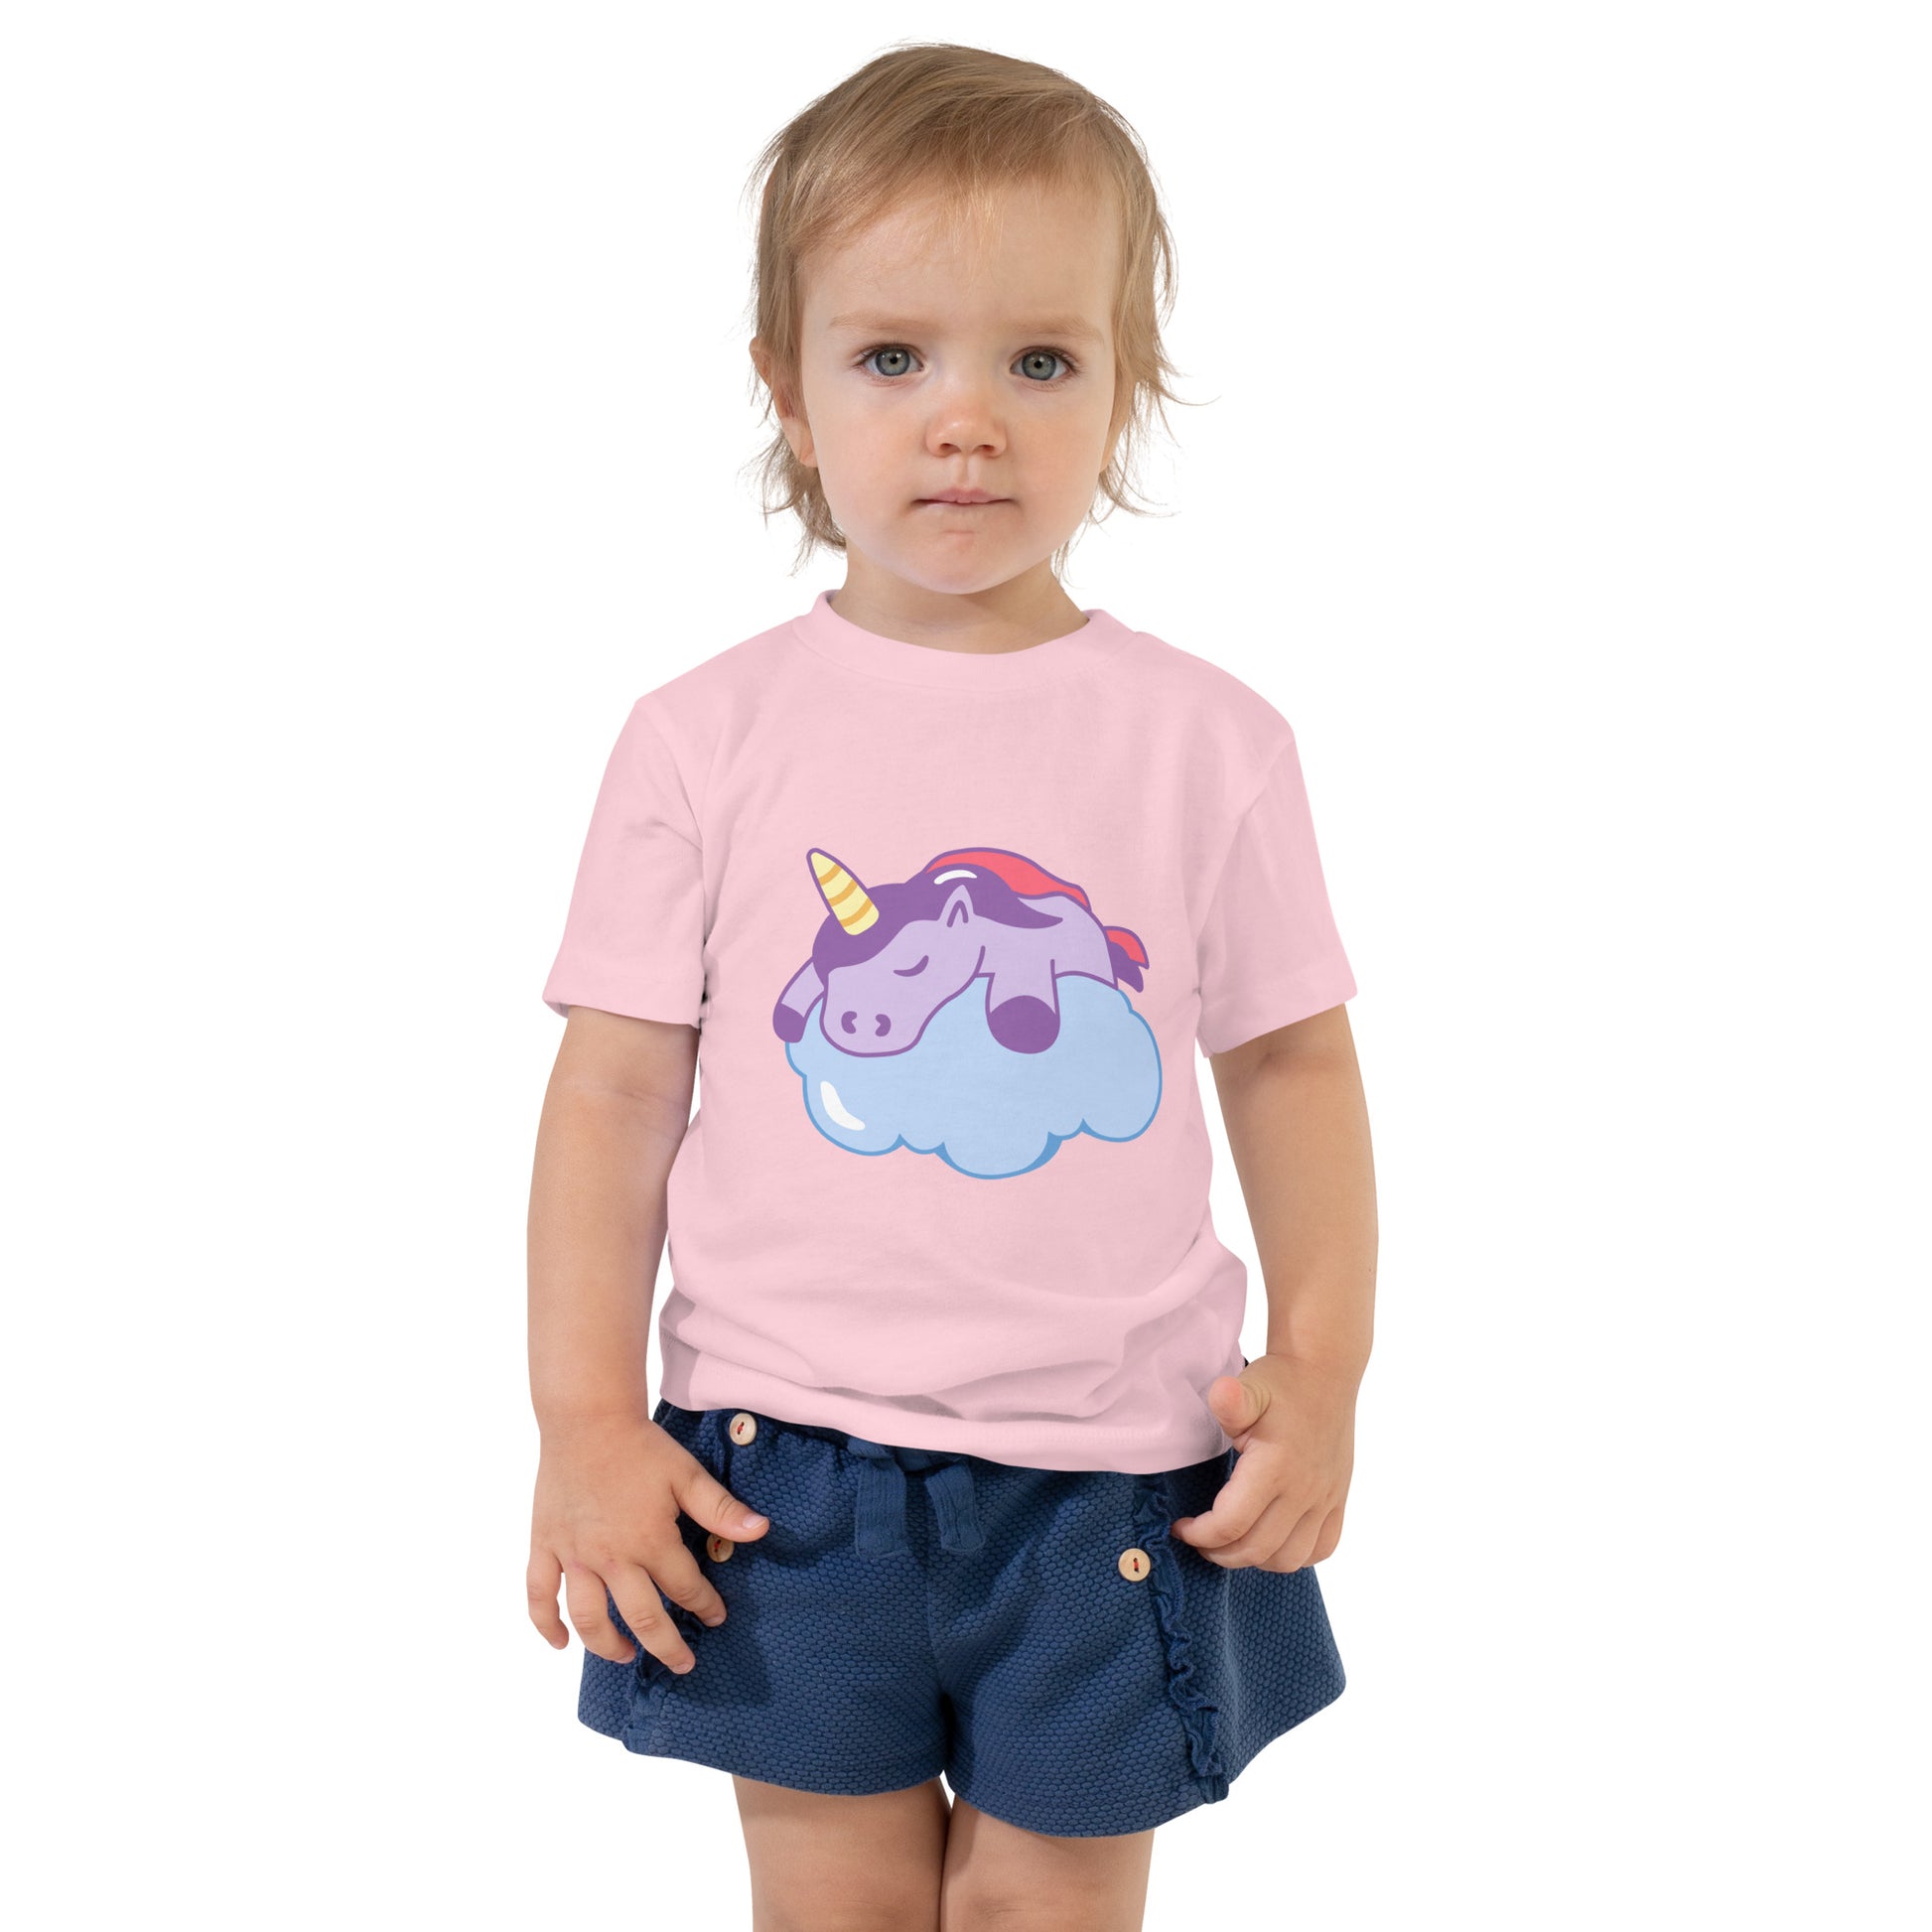 Toddler with a pink T-shirt with a print of a sleeping unicorn on a cloud